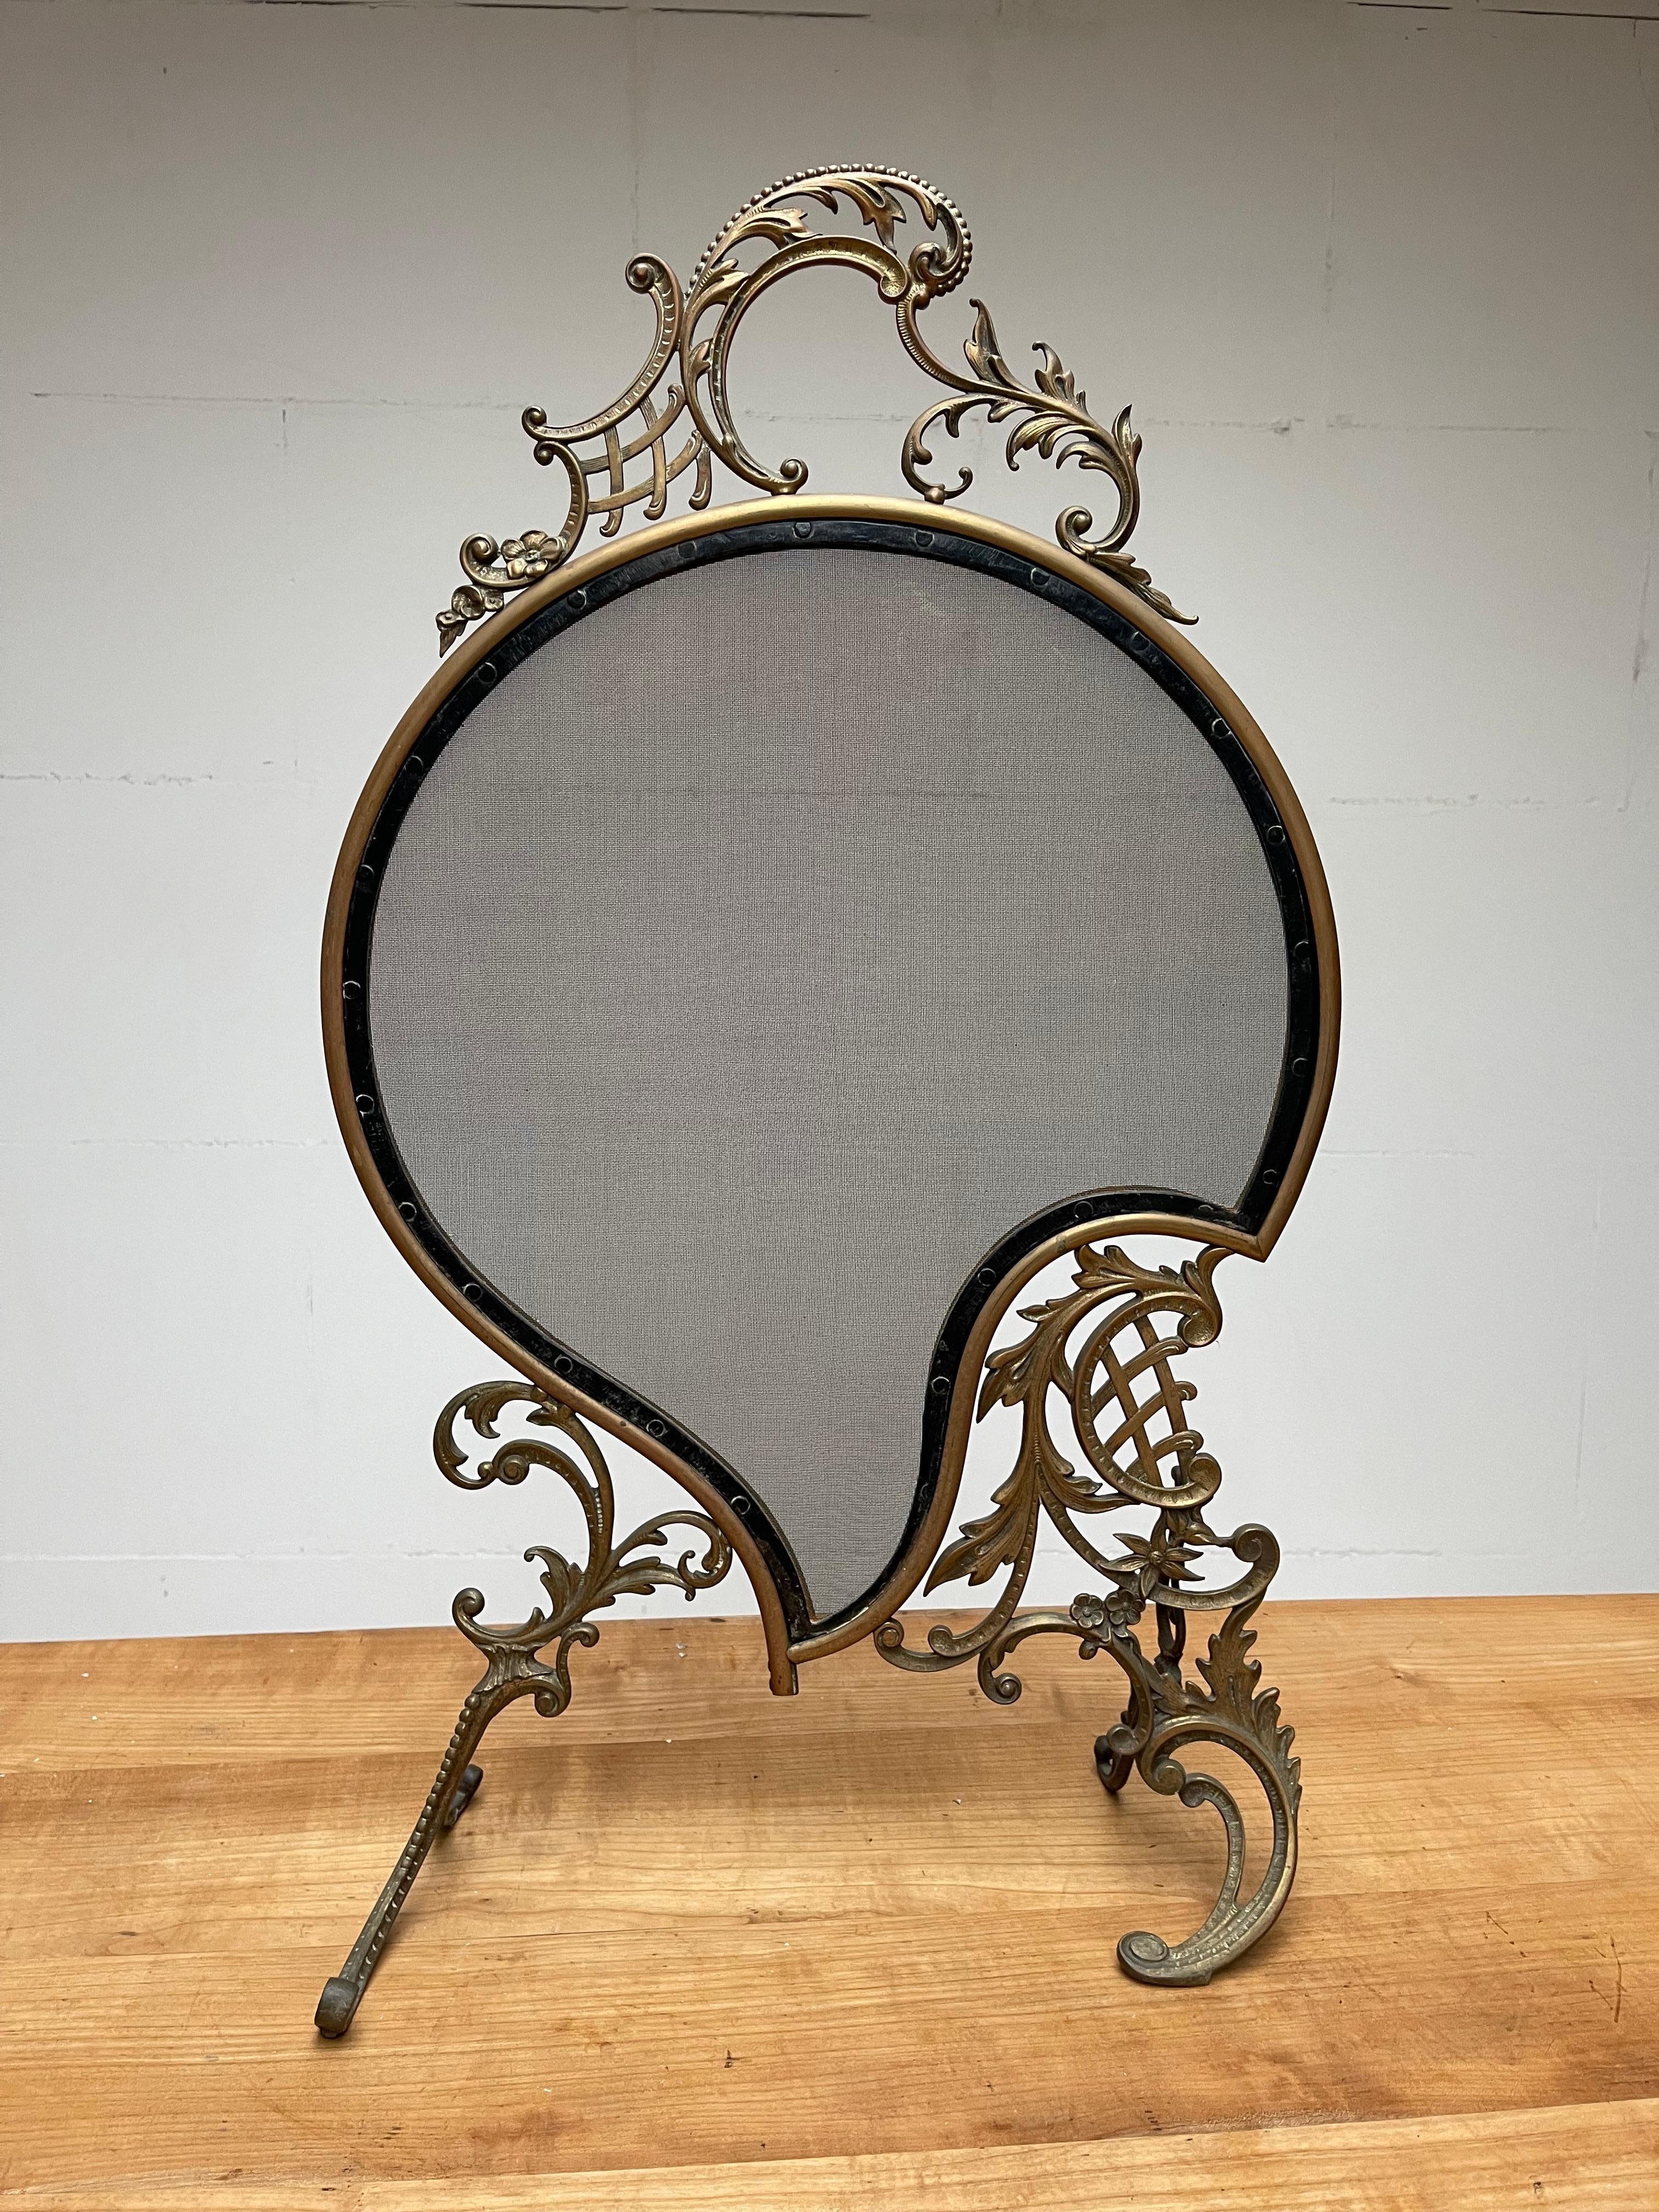 Patinated Elegant Early 1900 Bronze and Wrought Iron Fire Screen with Mint Wire Mesh For Sale